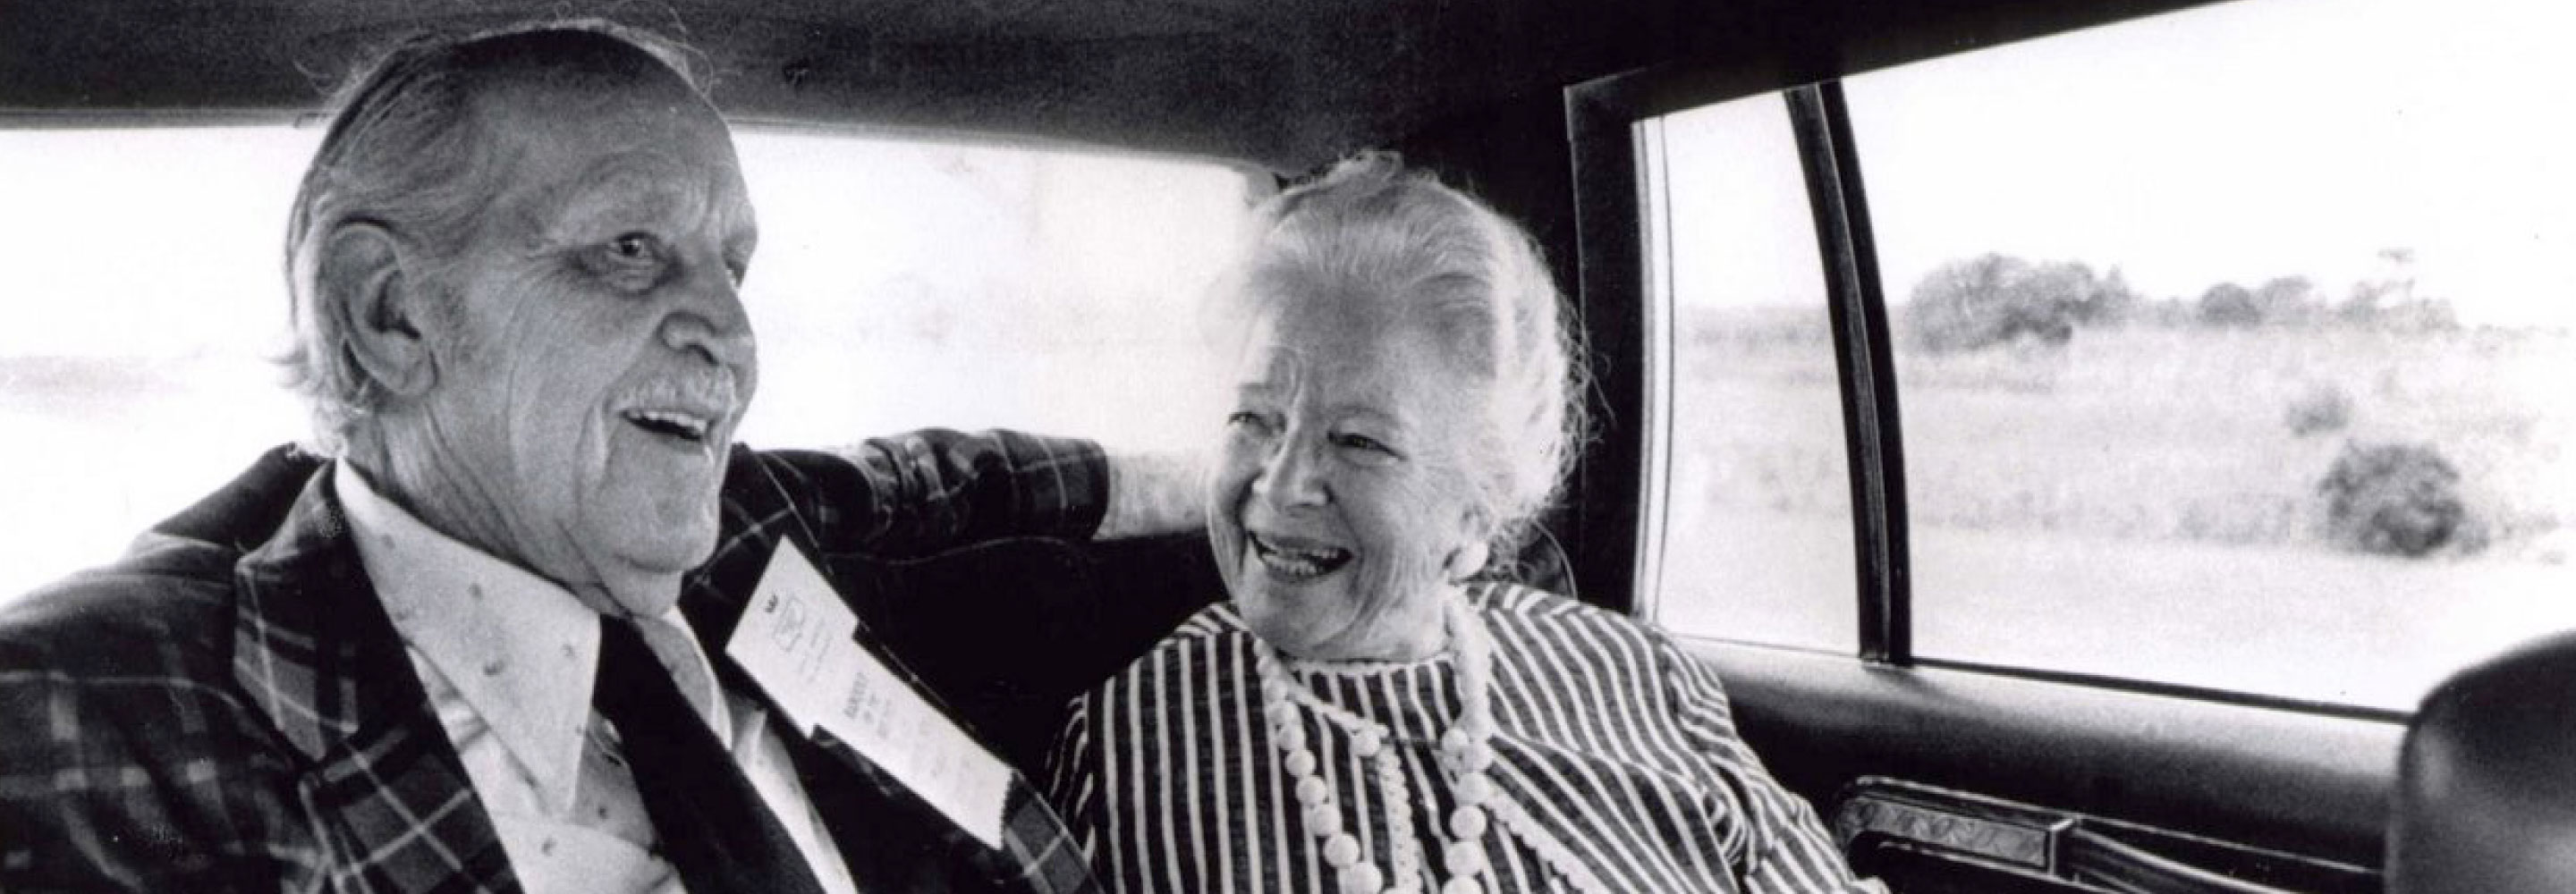 John D. and Catherine T. MacArthur in a car